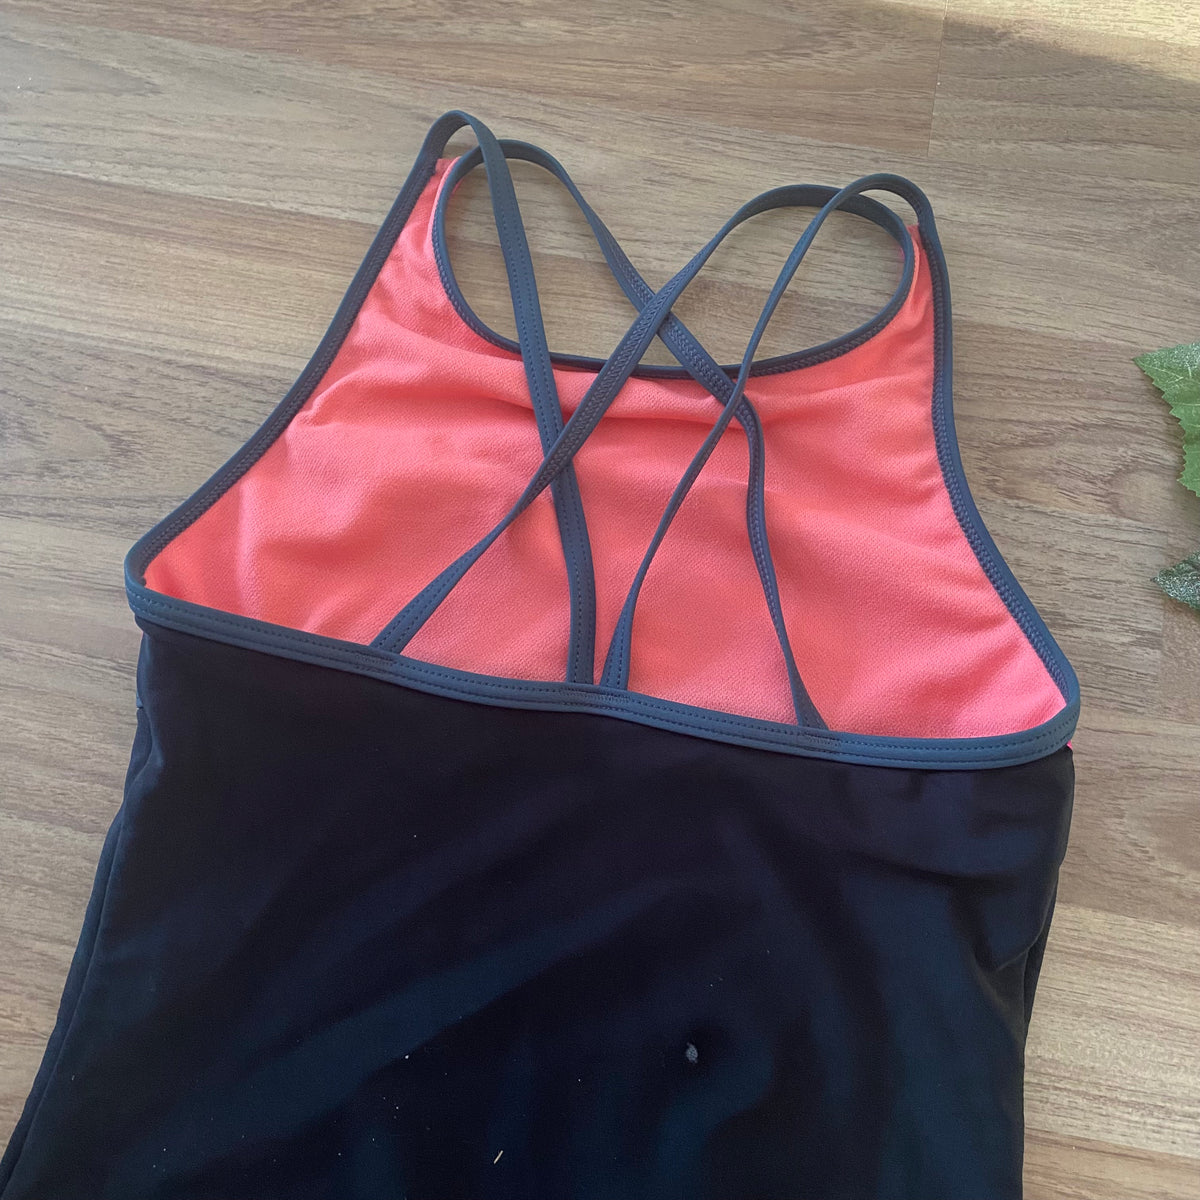 One Piece Bathing Suit (Girls Size 10)